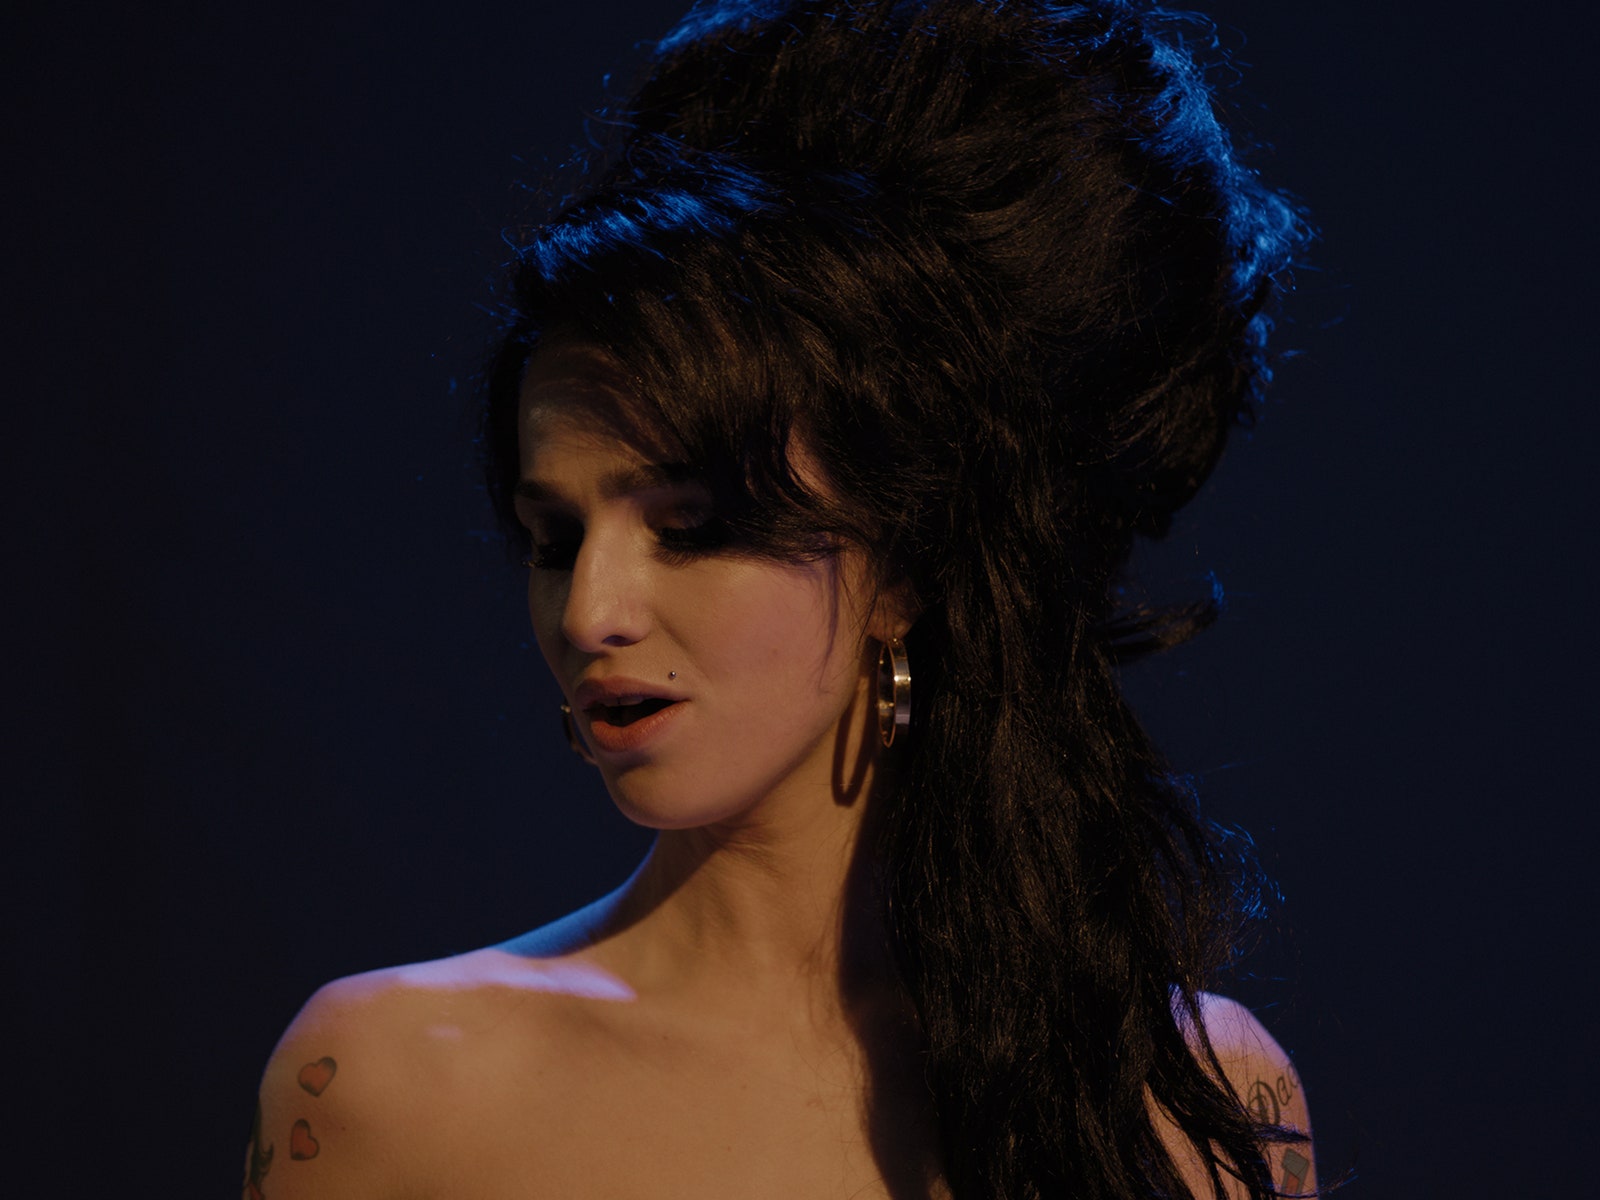 The Back To Black trailer reveals the first look at the Amy Winehouse biopic